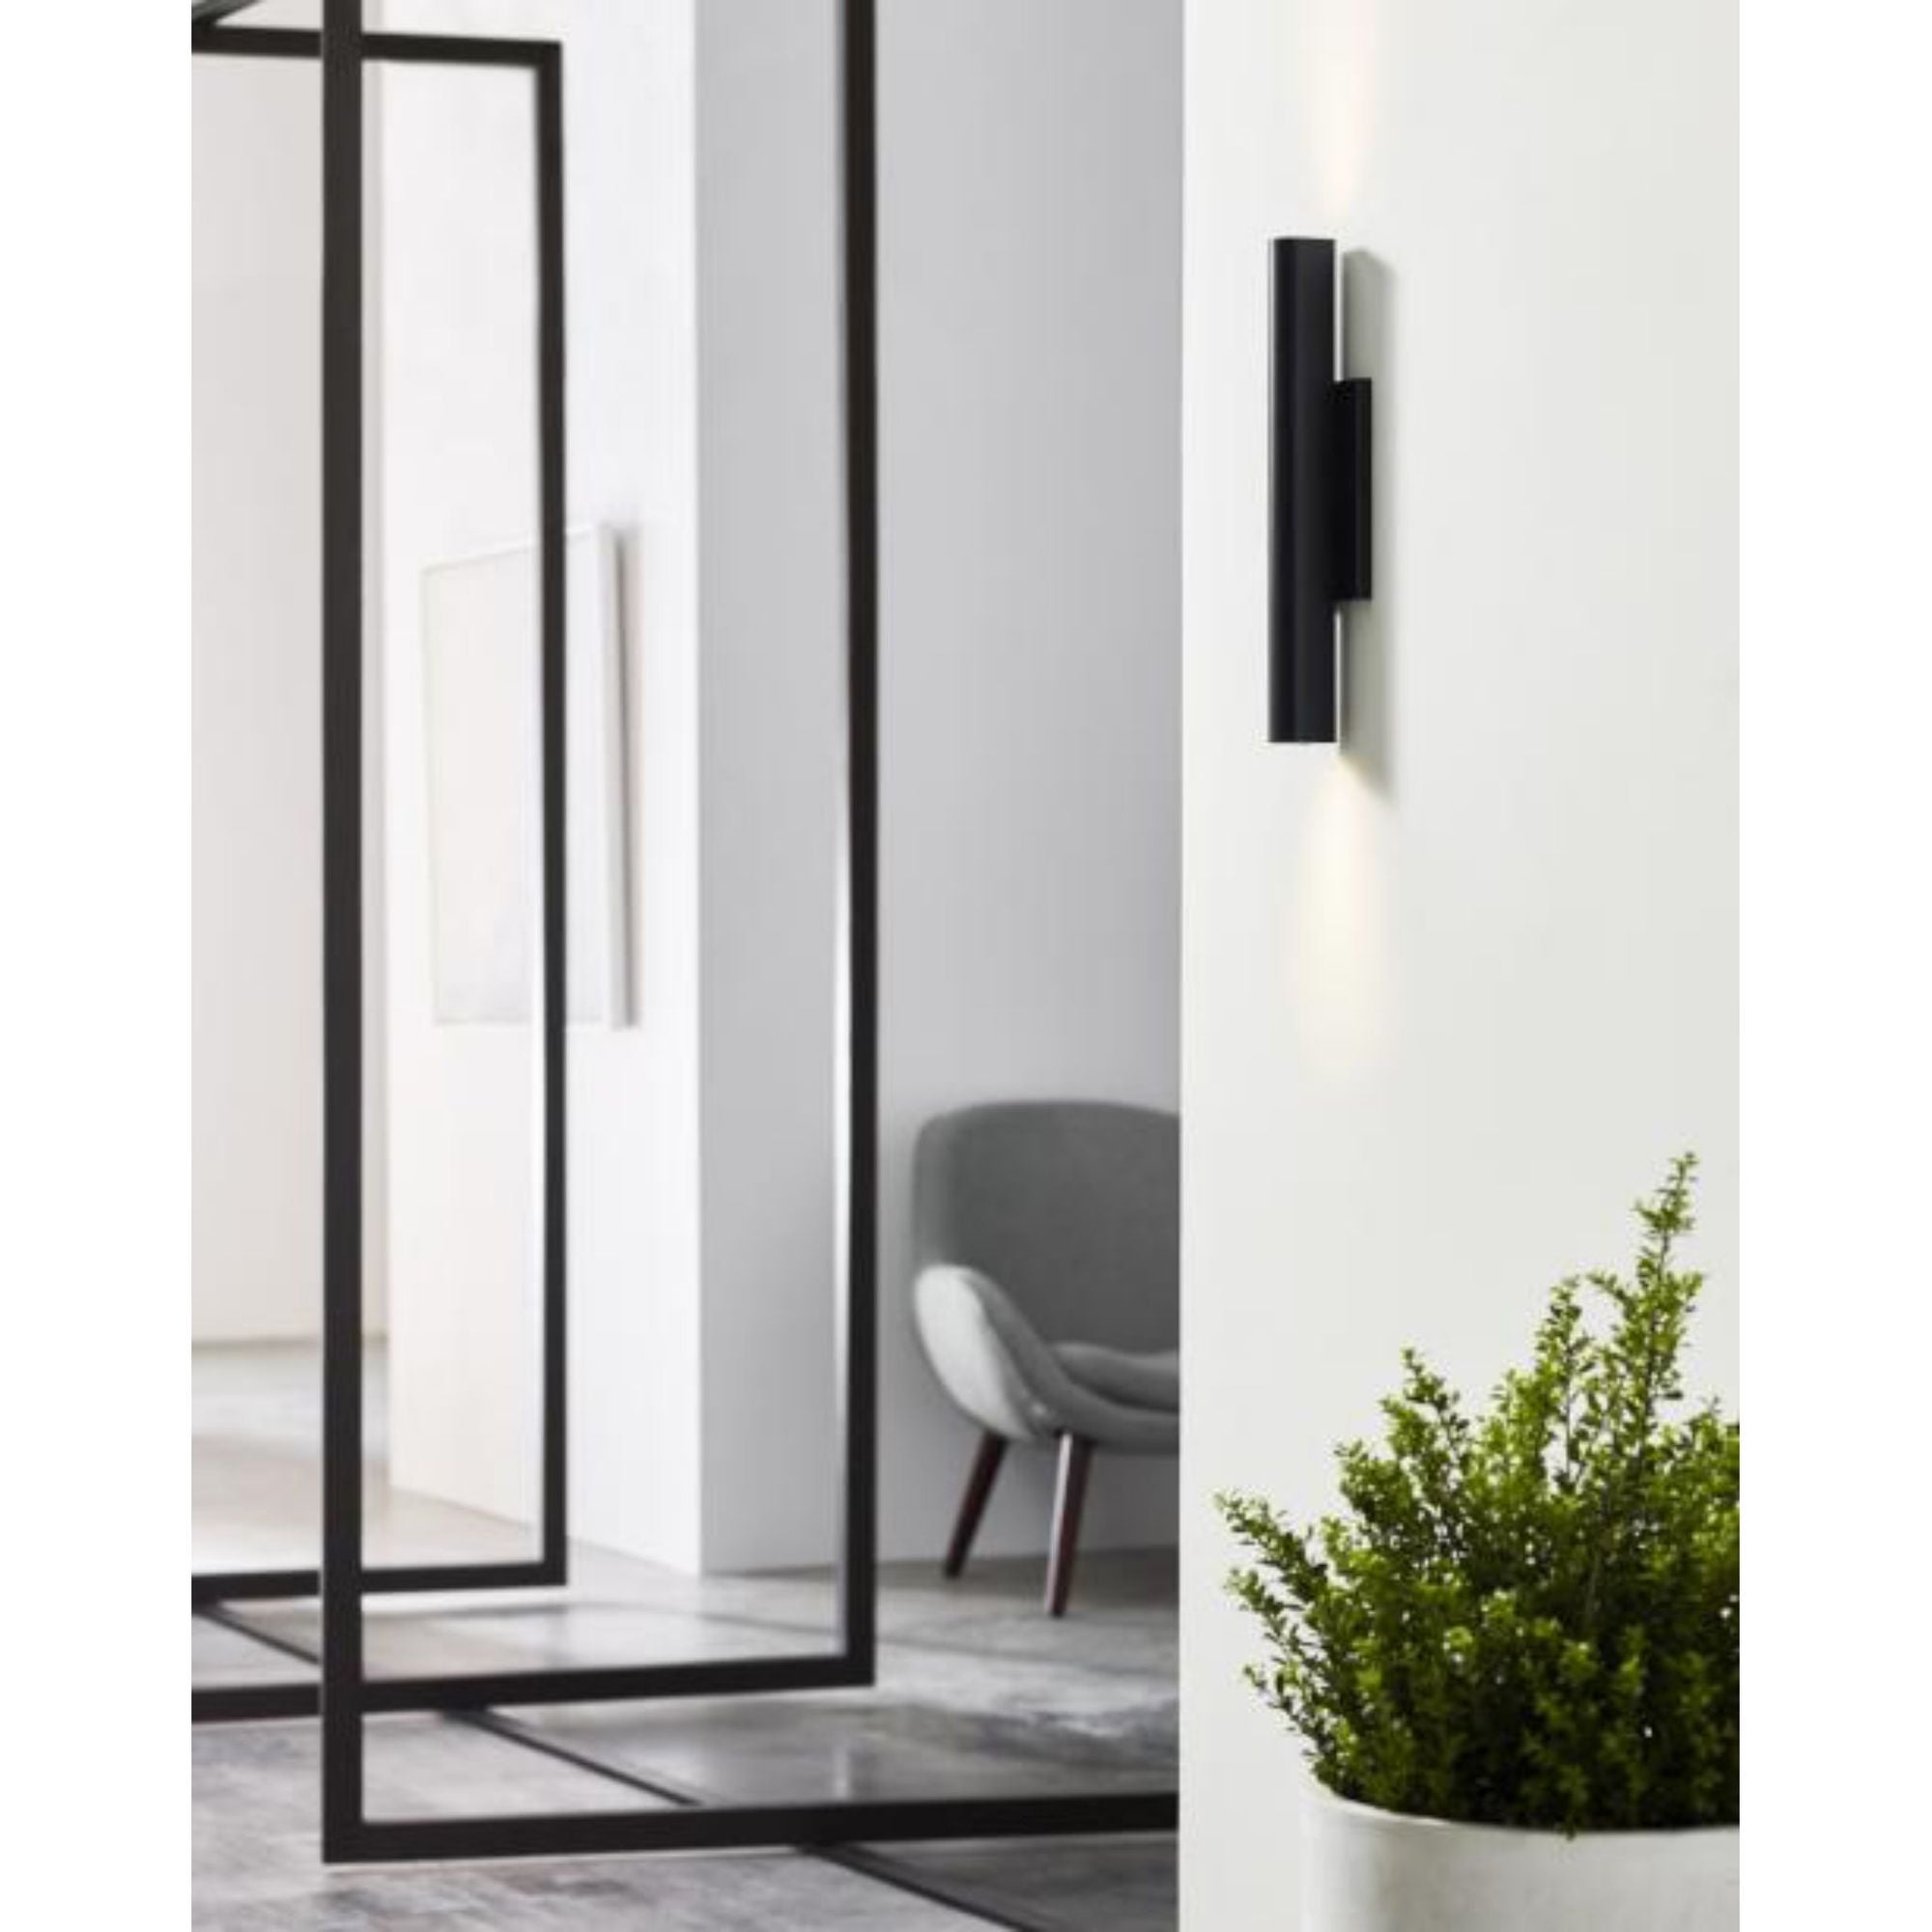 Chara 17 Outdoor Wall Outdoor 1-Light LED 3000K Black by Sean Lavin